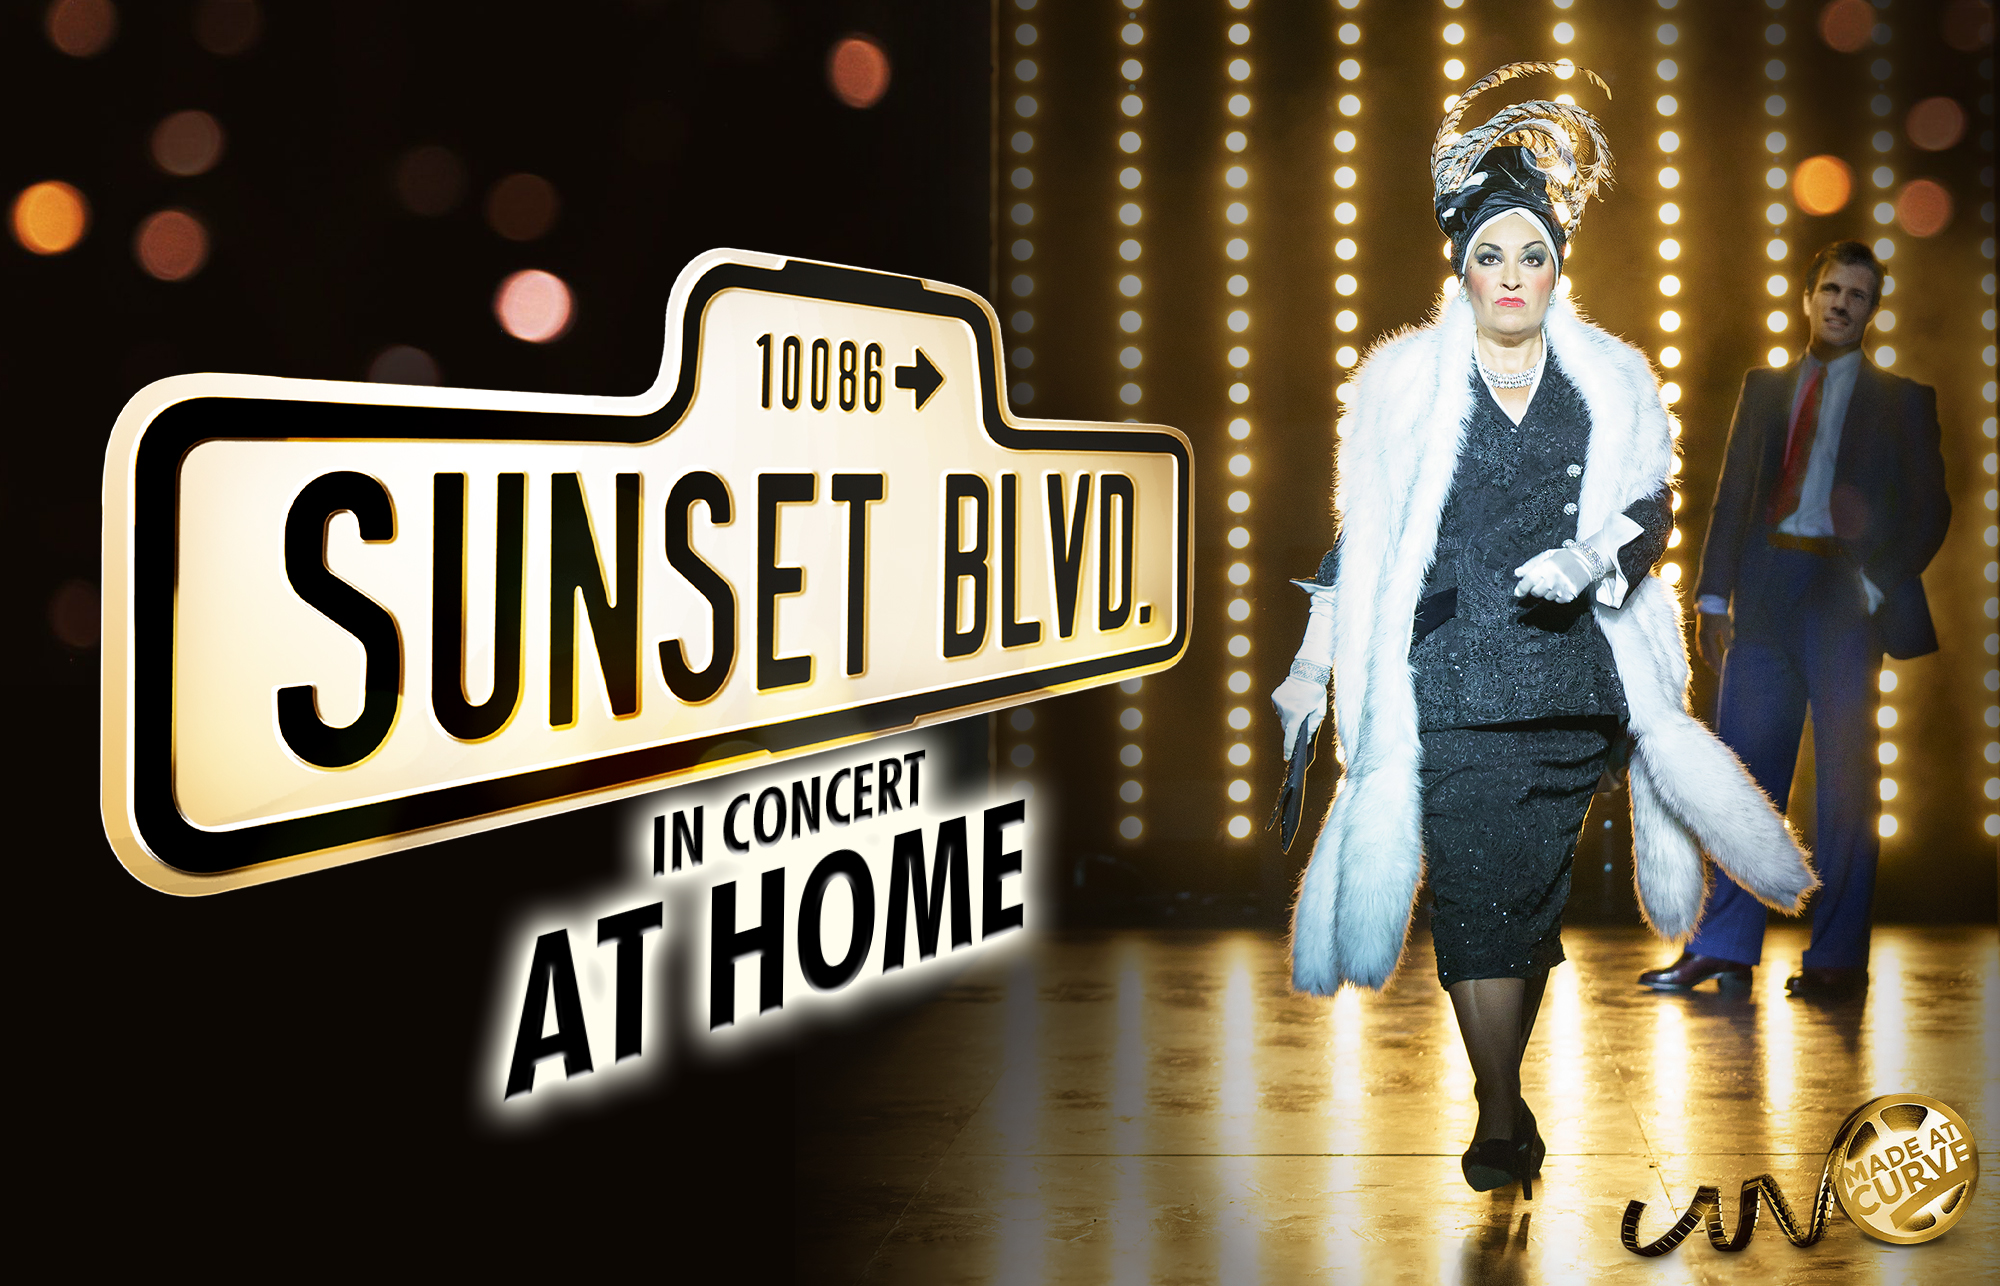 Promotional artwork for Sunset Boulevard in Concert - at Home featuring Ria Jones as Norma Desmond and Danny Mac as Joe Gillis in our 2017 production.